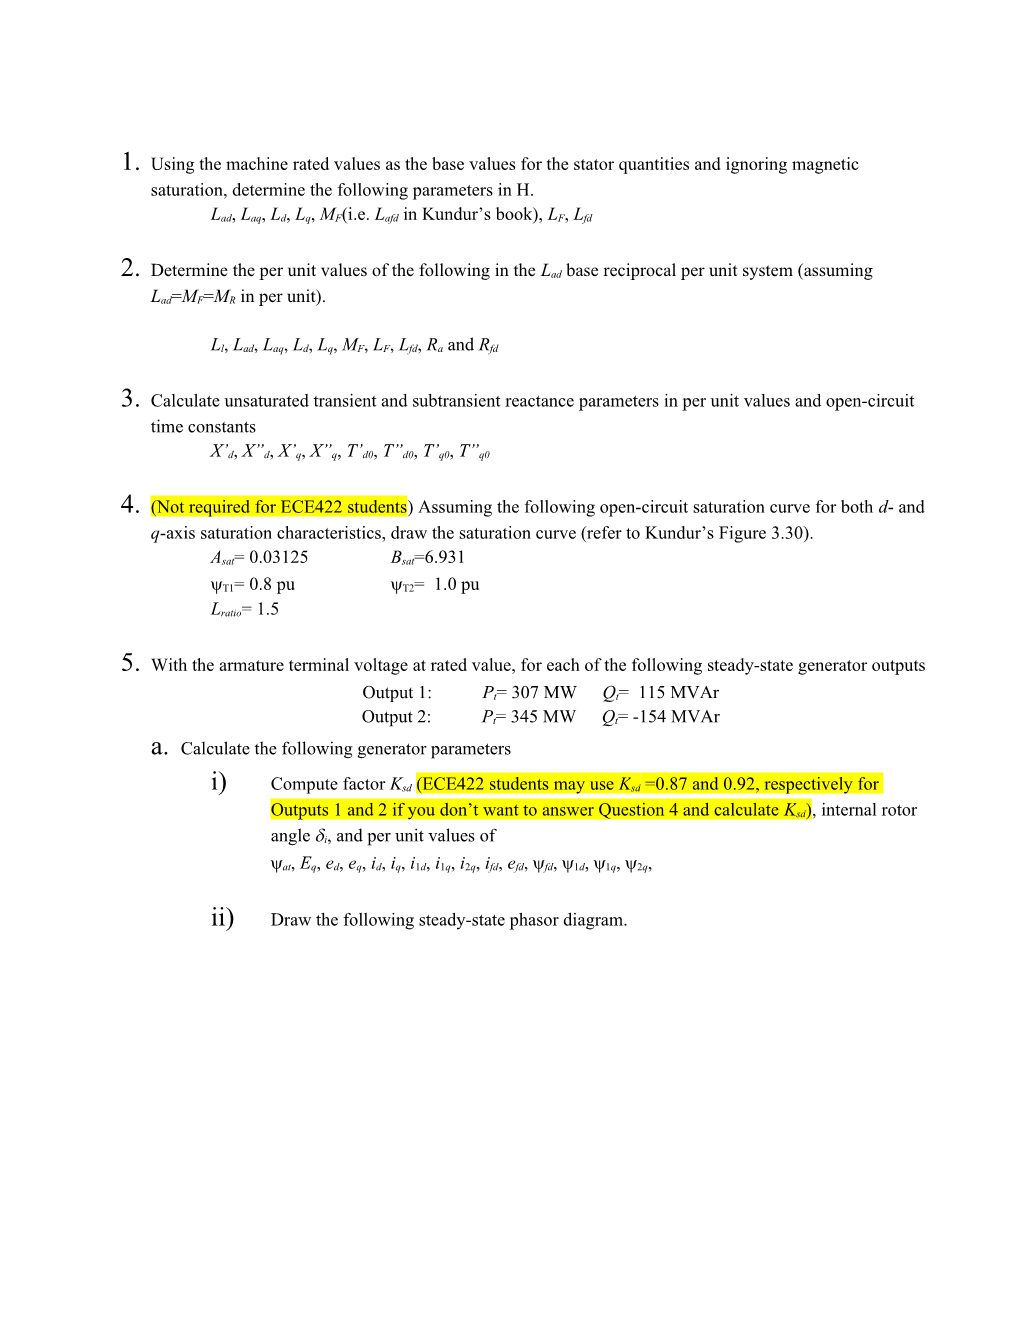 (ECE552 Students Need to Finish All Questions; ECE422 Students Who Finish the Highlighted